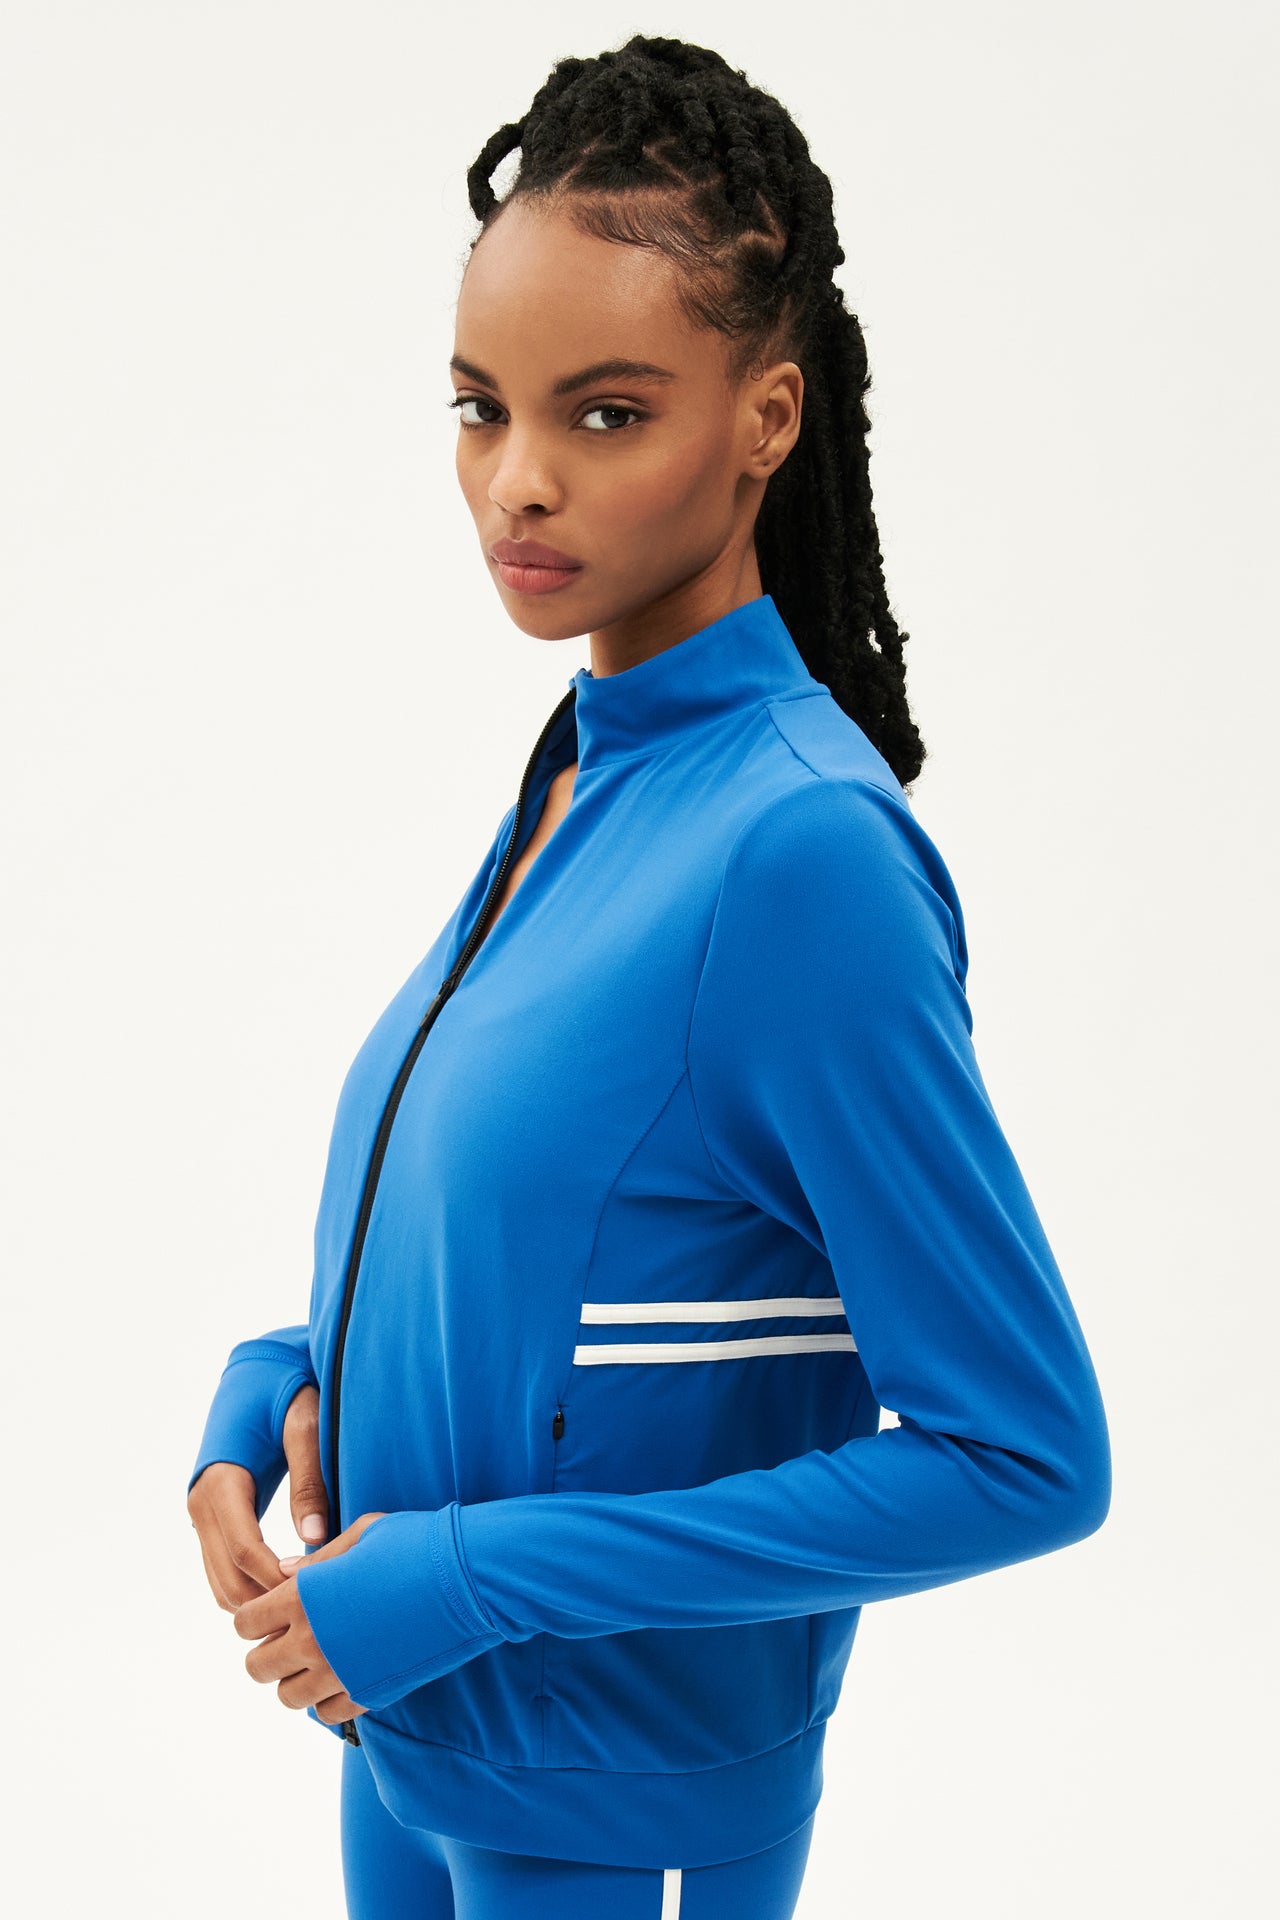 A woman wearing a SPLITS59 Rain Airweight Jacket in Classic Blue/White and leggings heads to her hot yoga class.